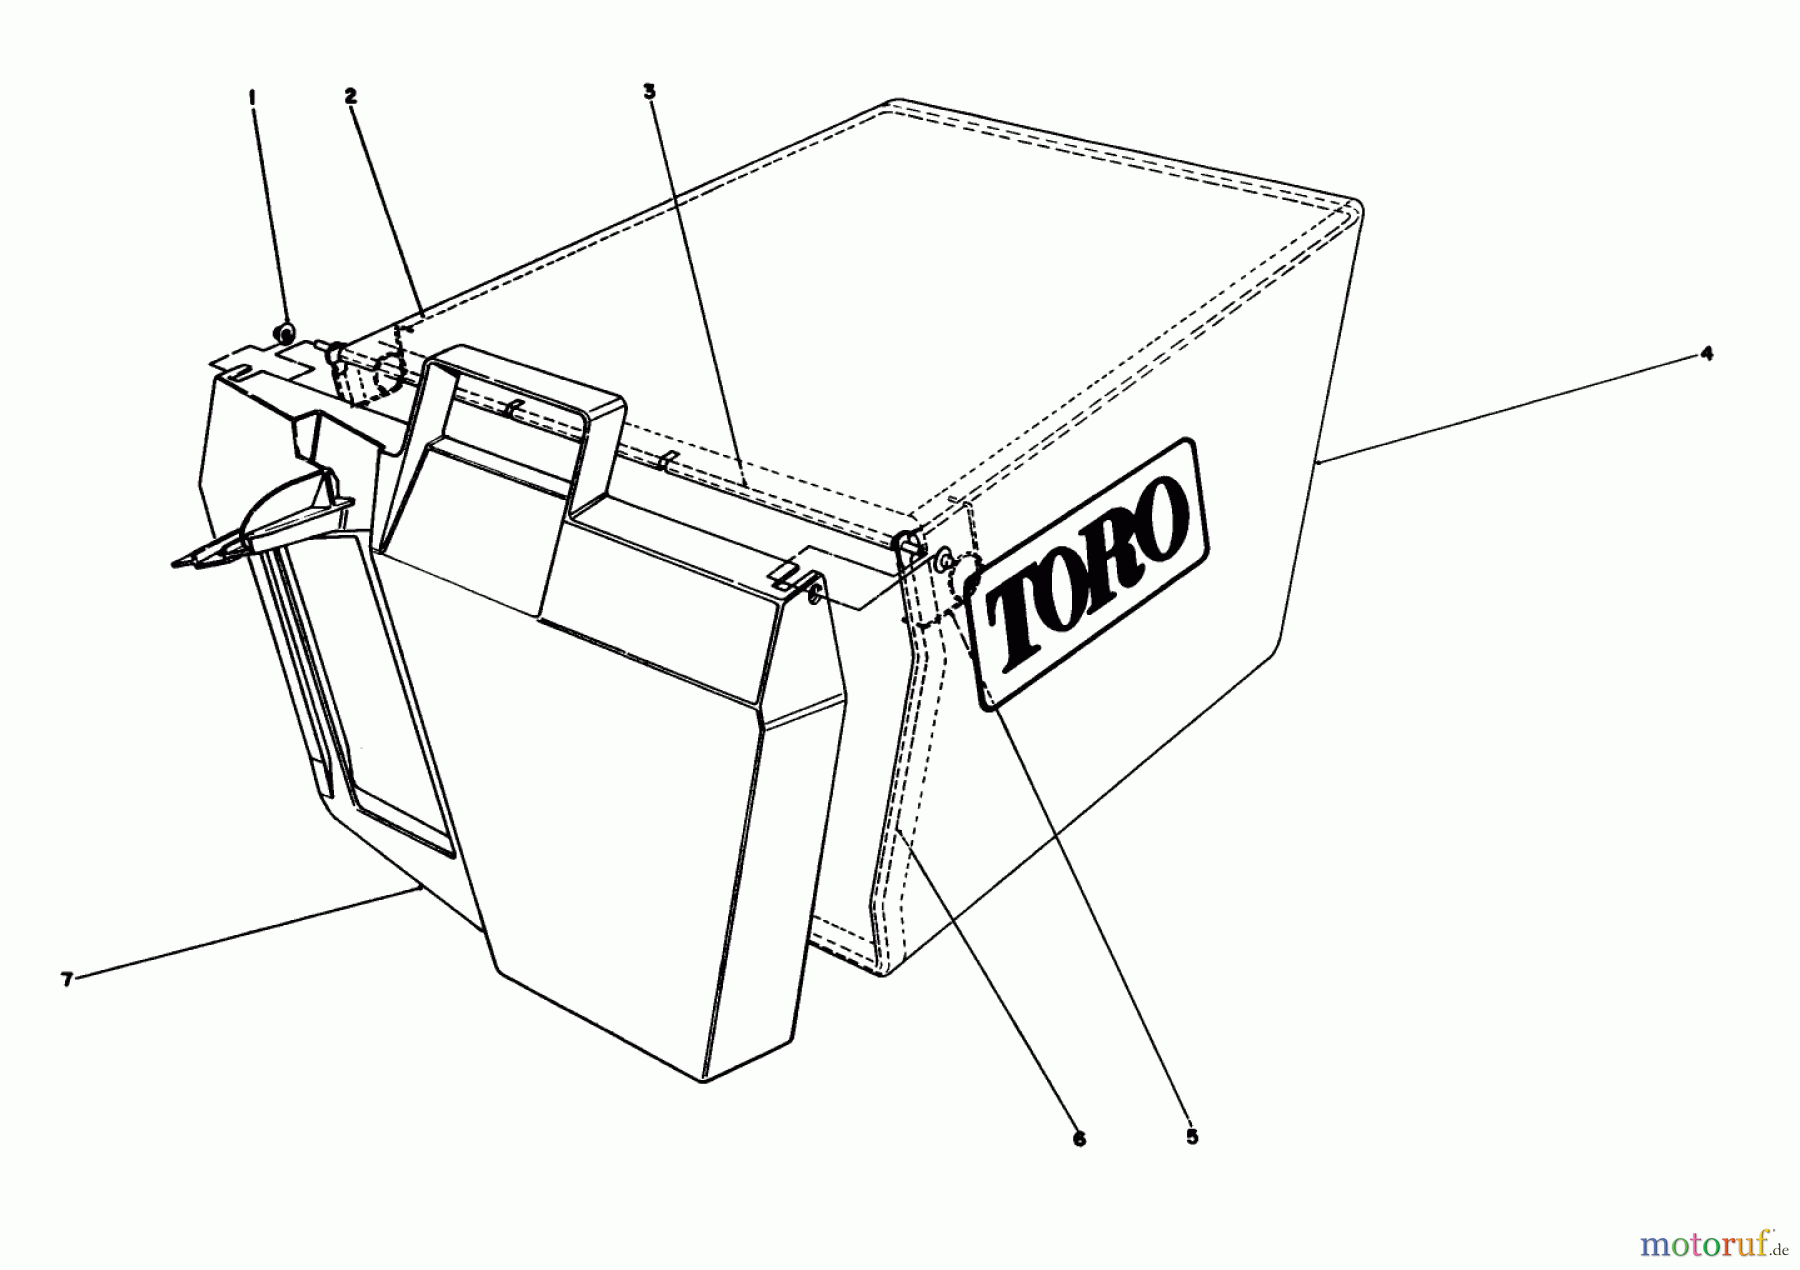  Toro Neu Accessories, Mower 59179 - Toro Bagging Discharge Tunnel and Plug BAG ASSEMBLY